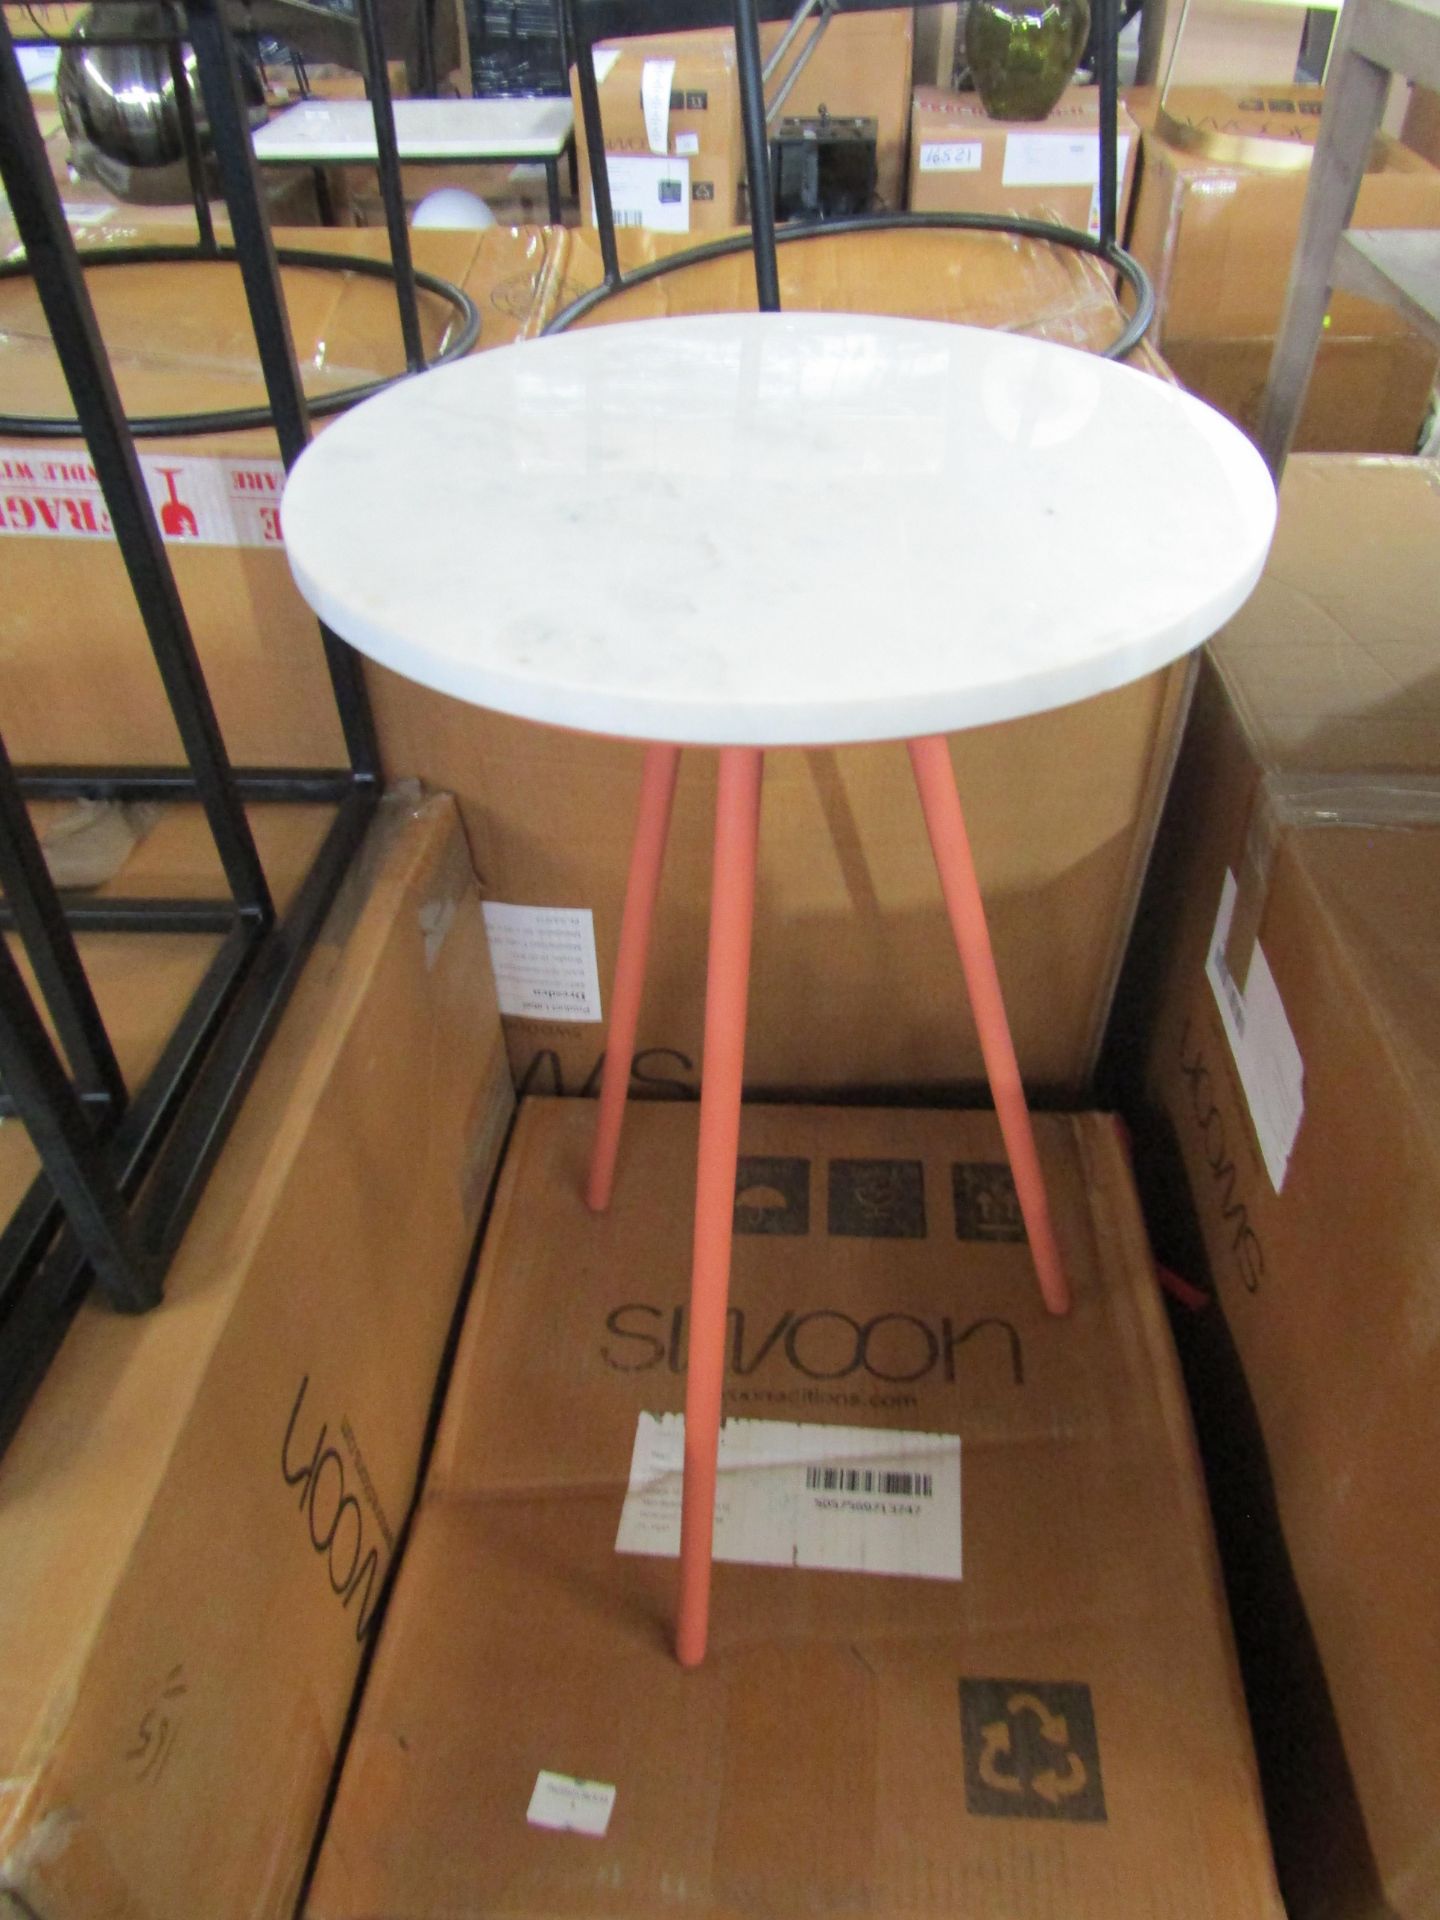 Swoon Pearl Side Table White Marble & Coral RRP £149.00